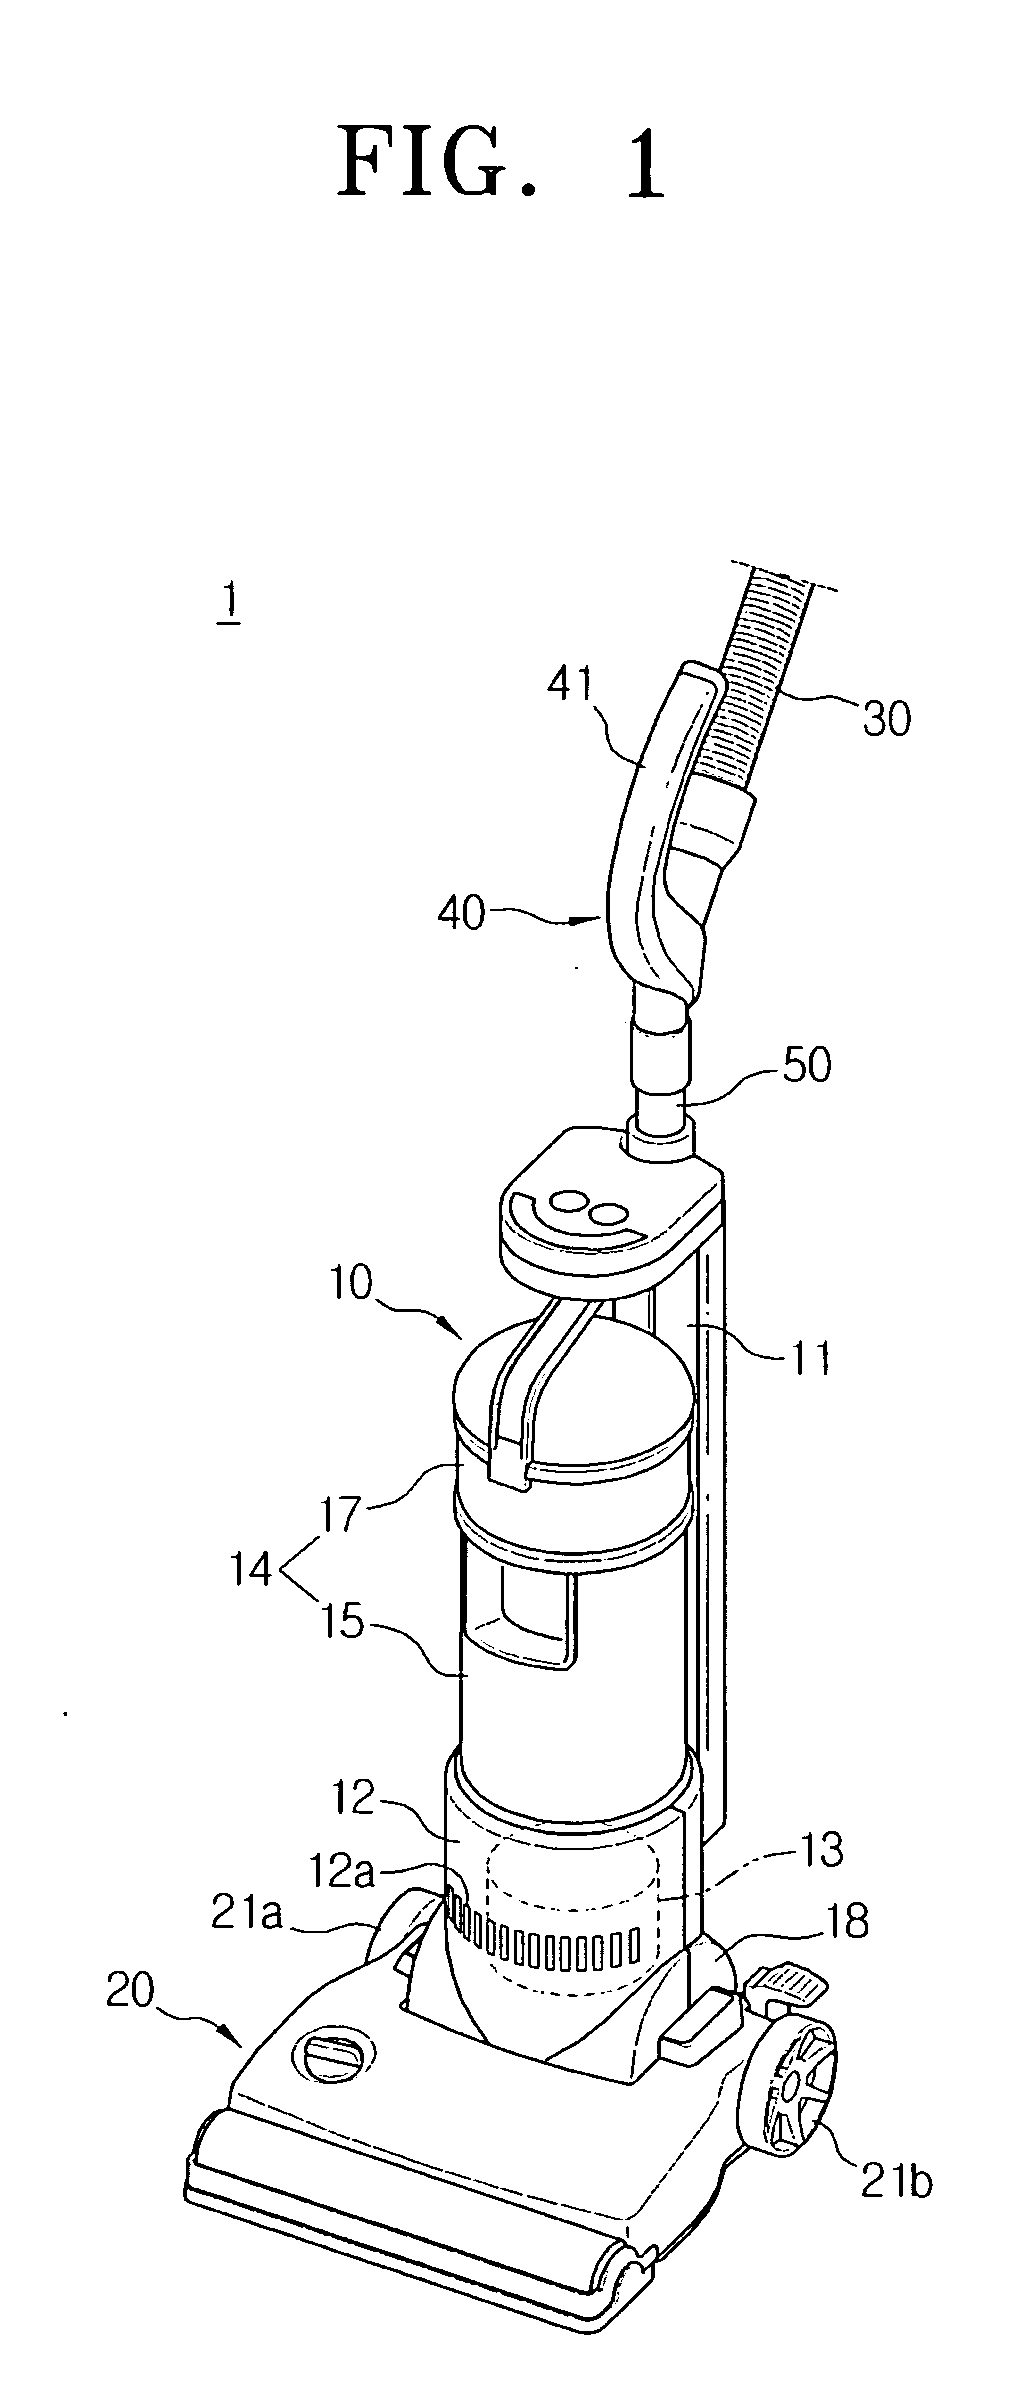 Vacuum cleaner having suction path switching unit